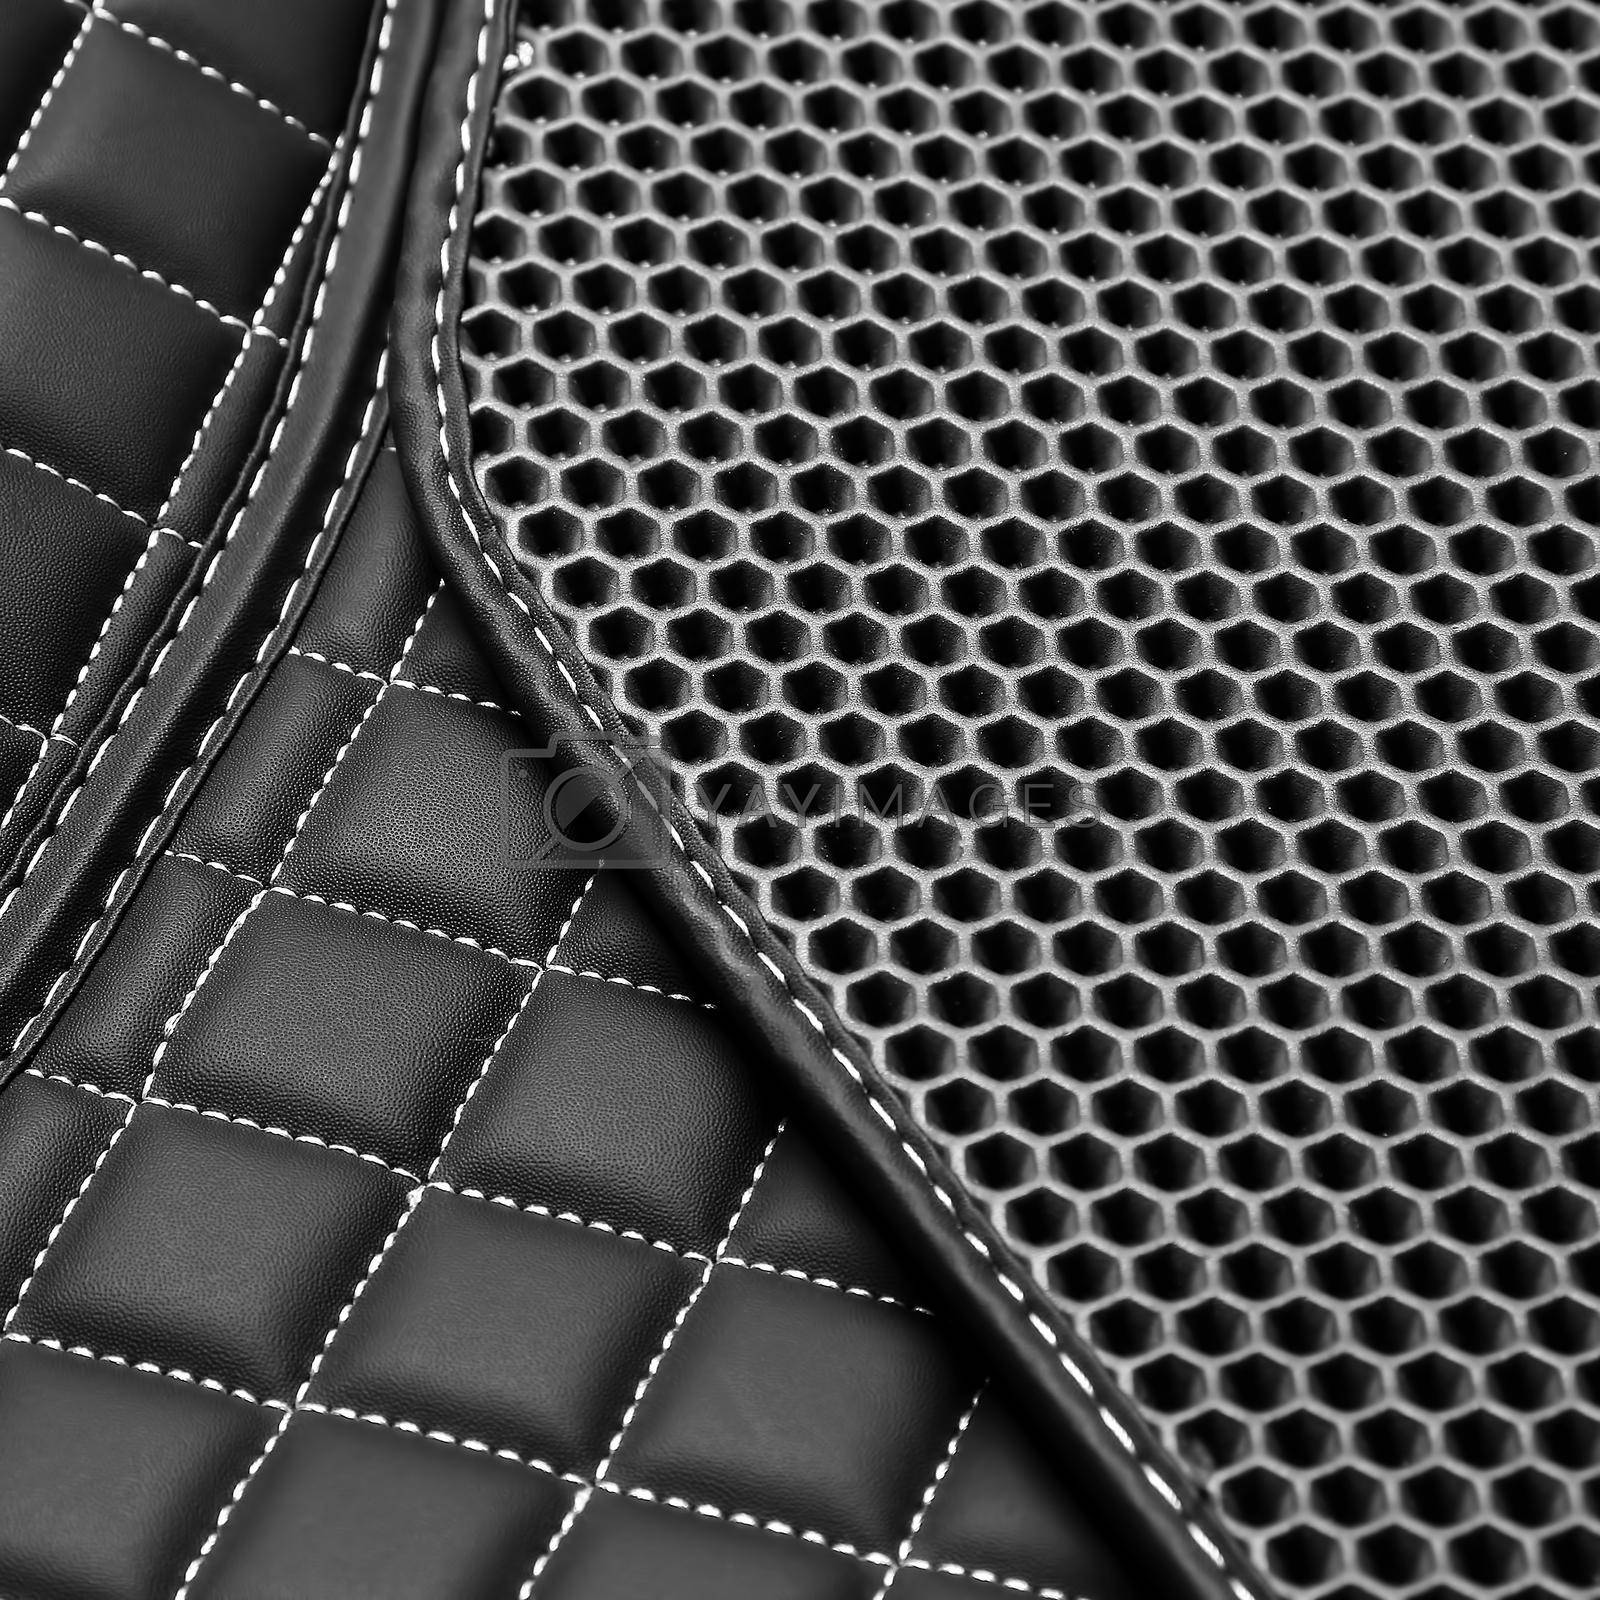 Royalty free image of Leather background with sewing stitch by A_Karim